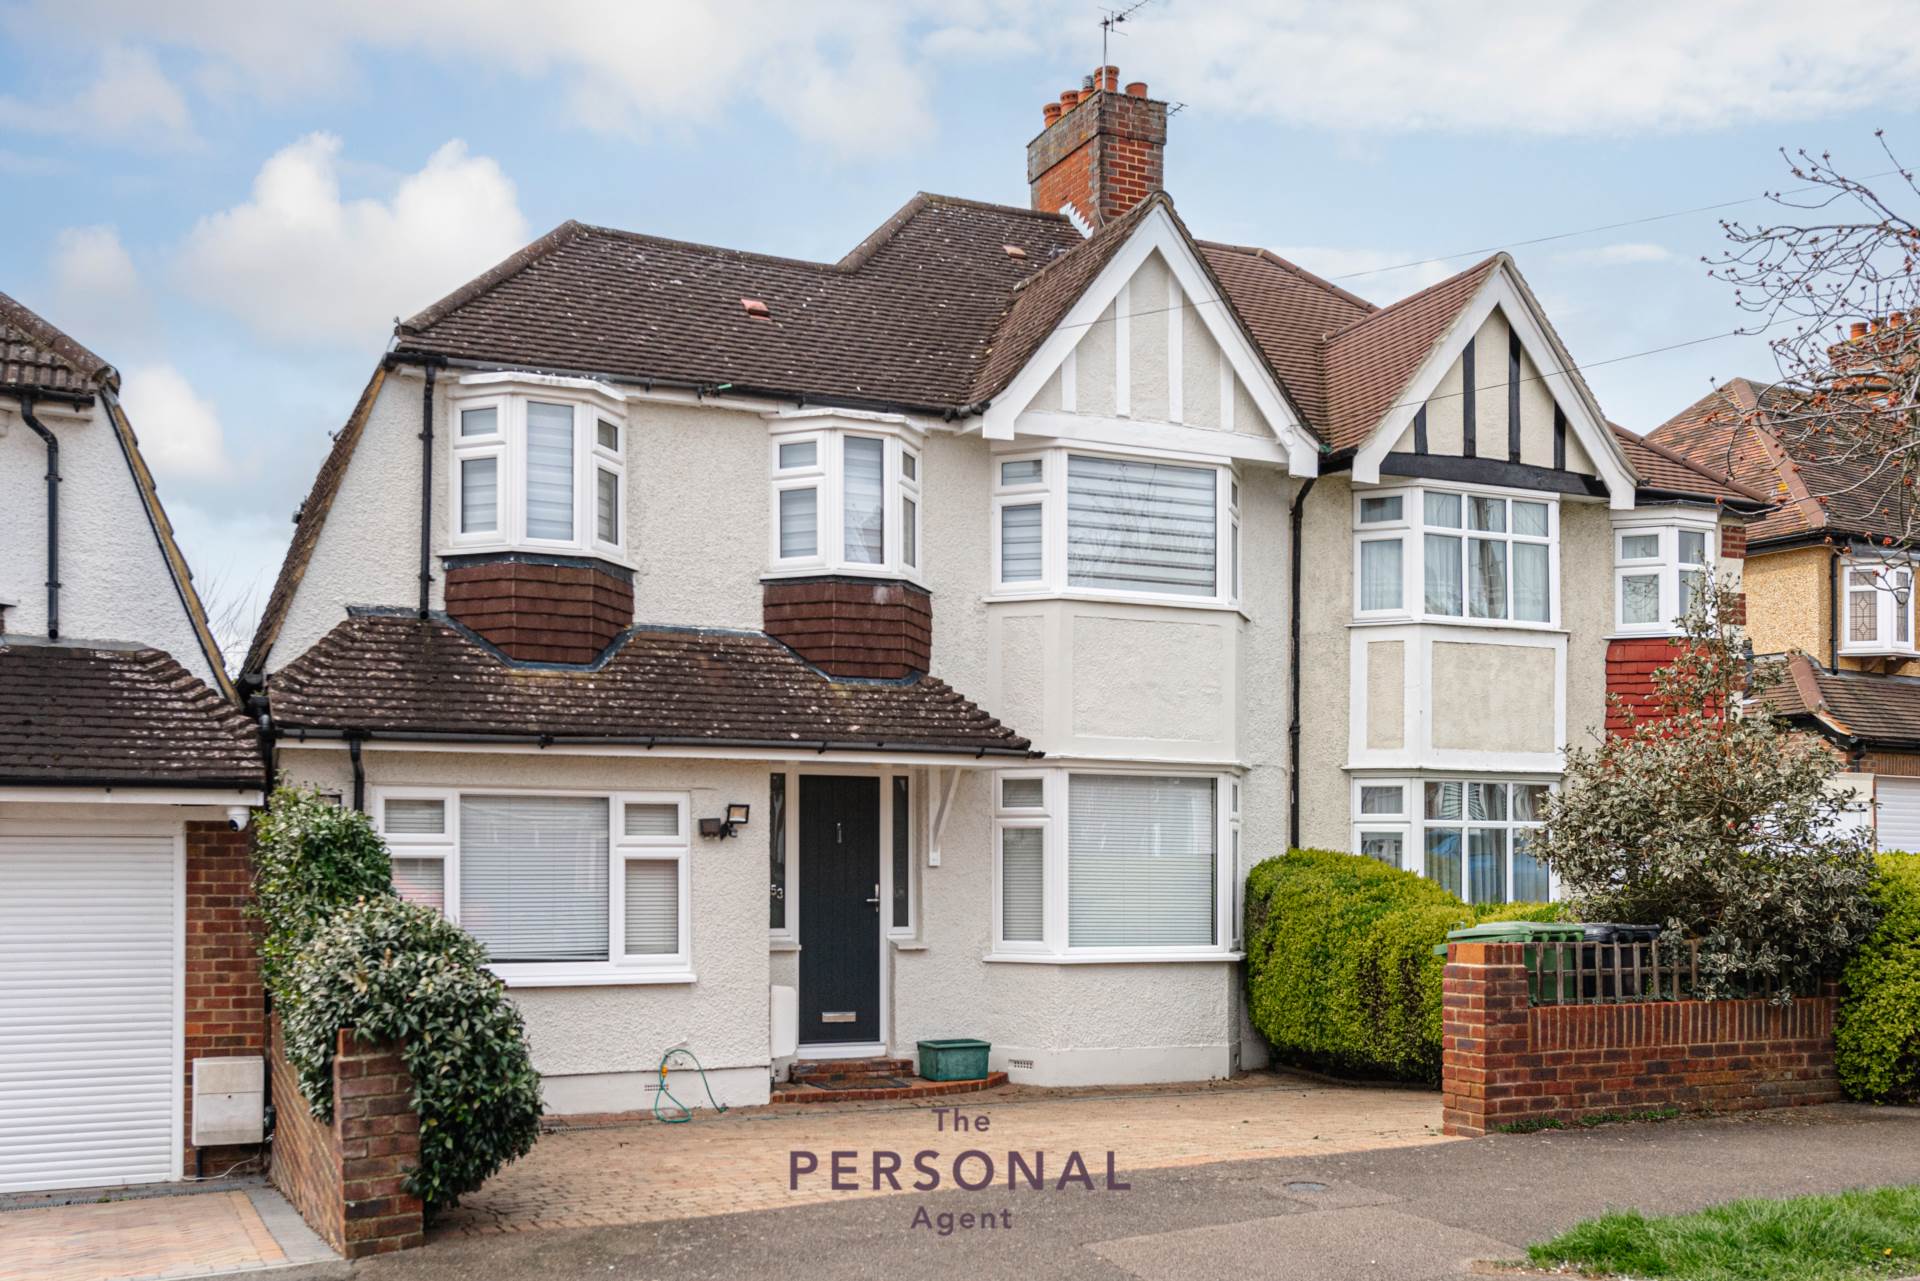 4 bed Semi-Detached House for rent in Epsom. From The Personal Agent - Epsom